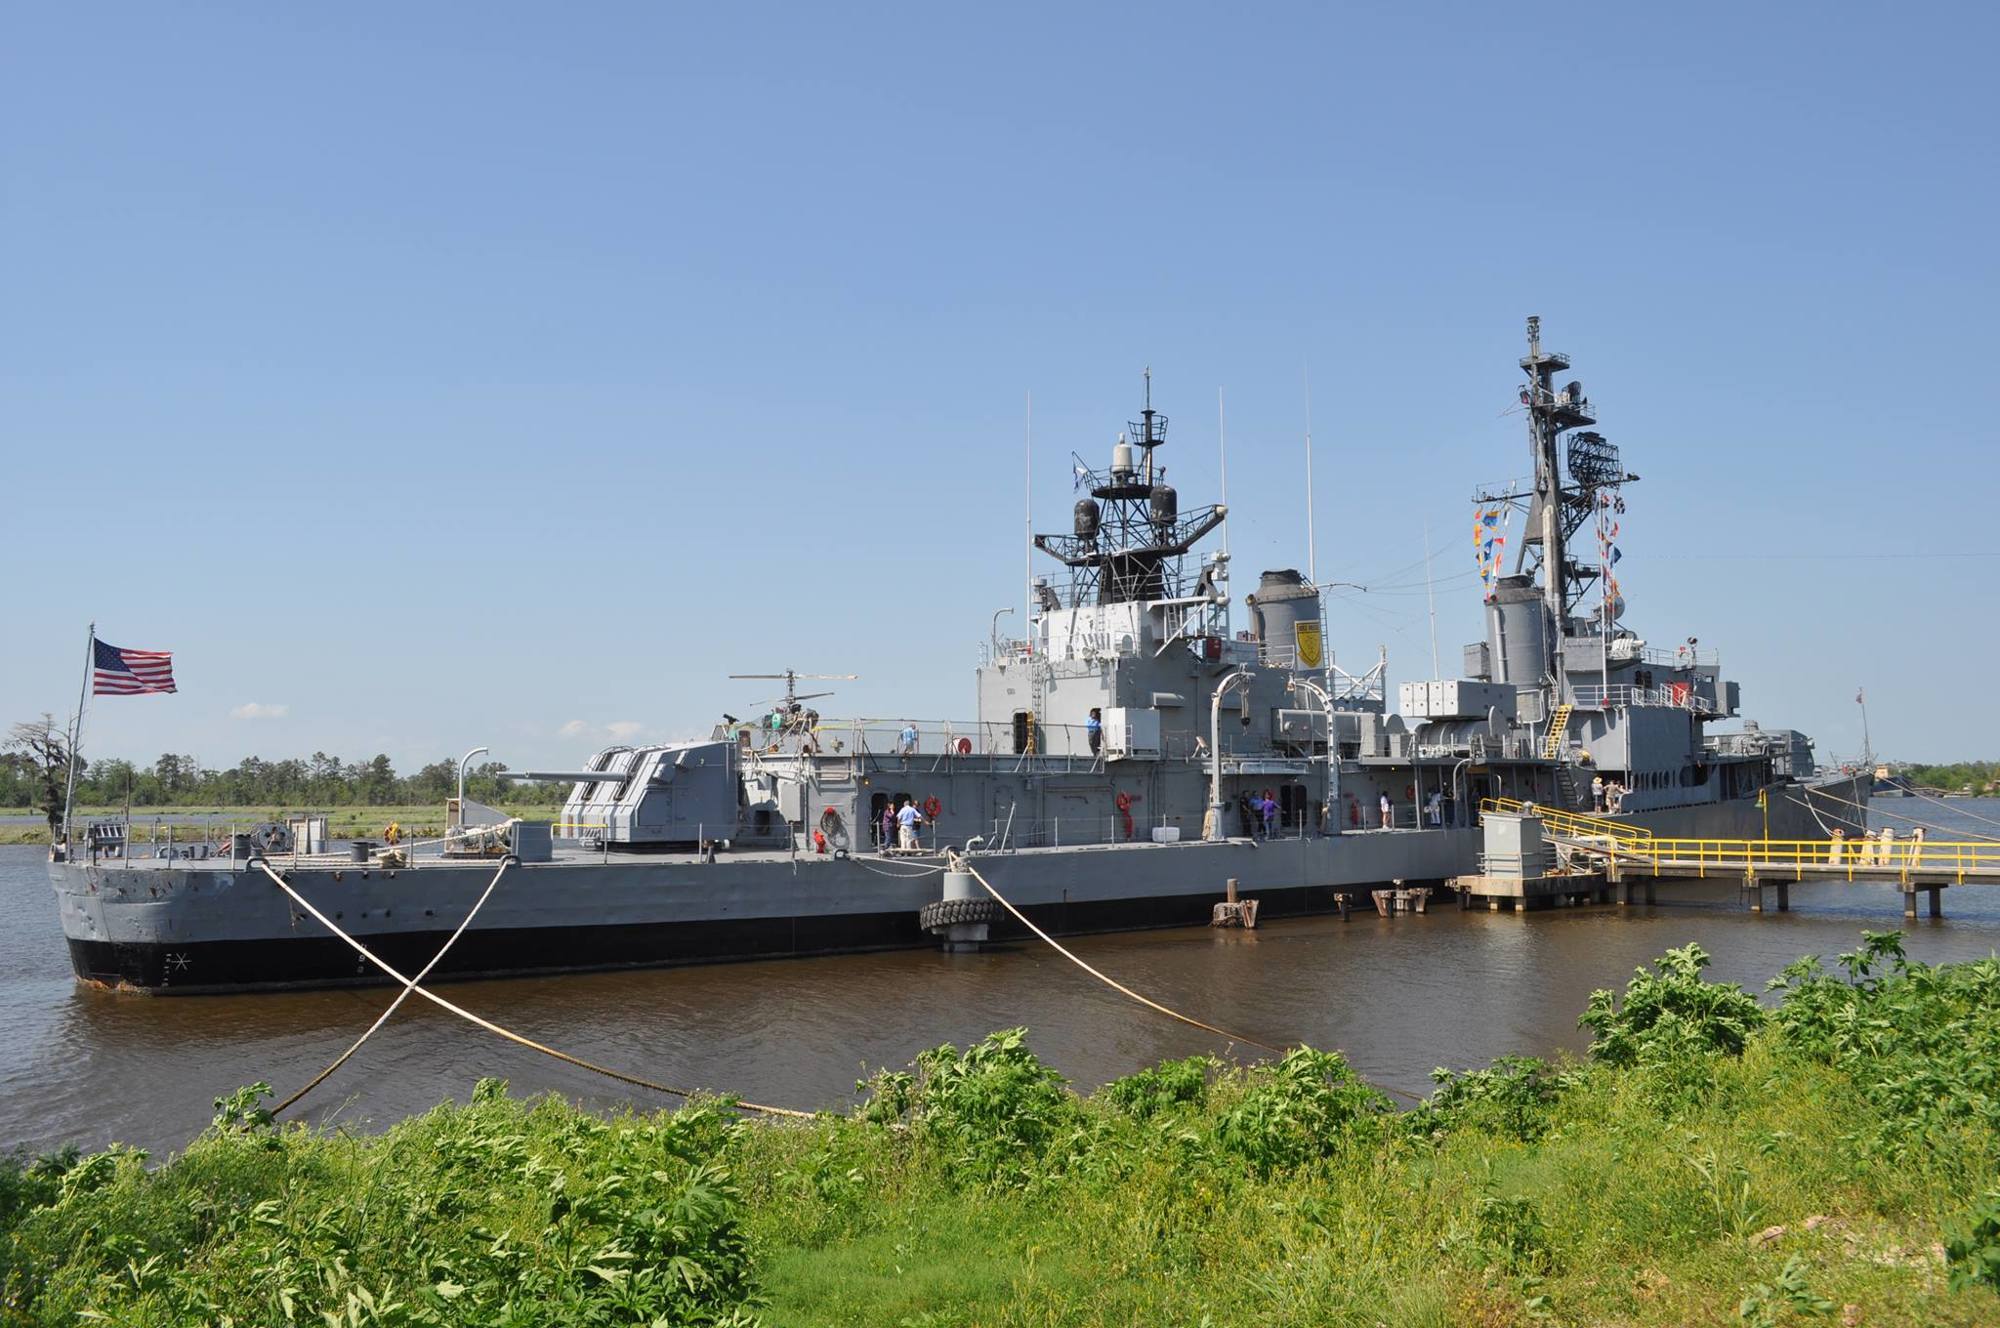 The USS Orleck DD-886 is now a naval museum in Lake Charles, Louisiana. A Jacksonville group plans to tow it to the Shipyards.